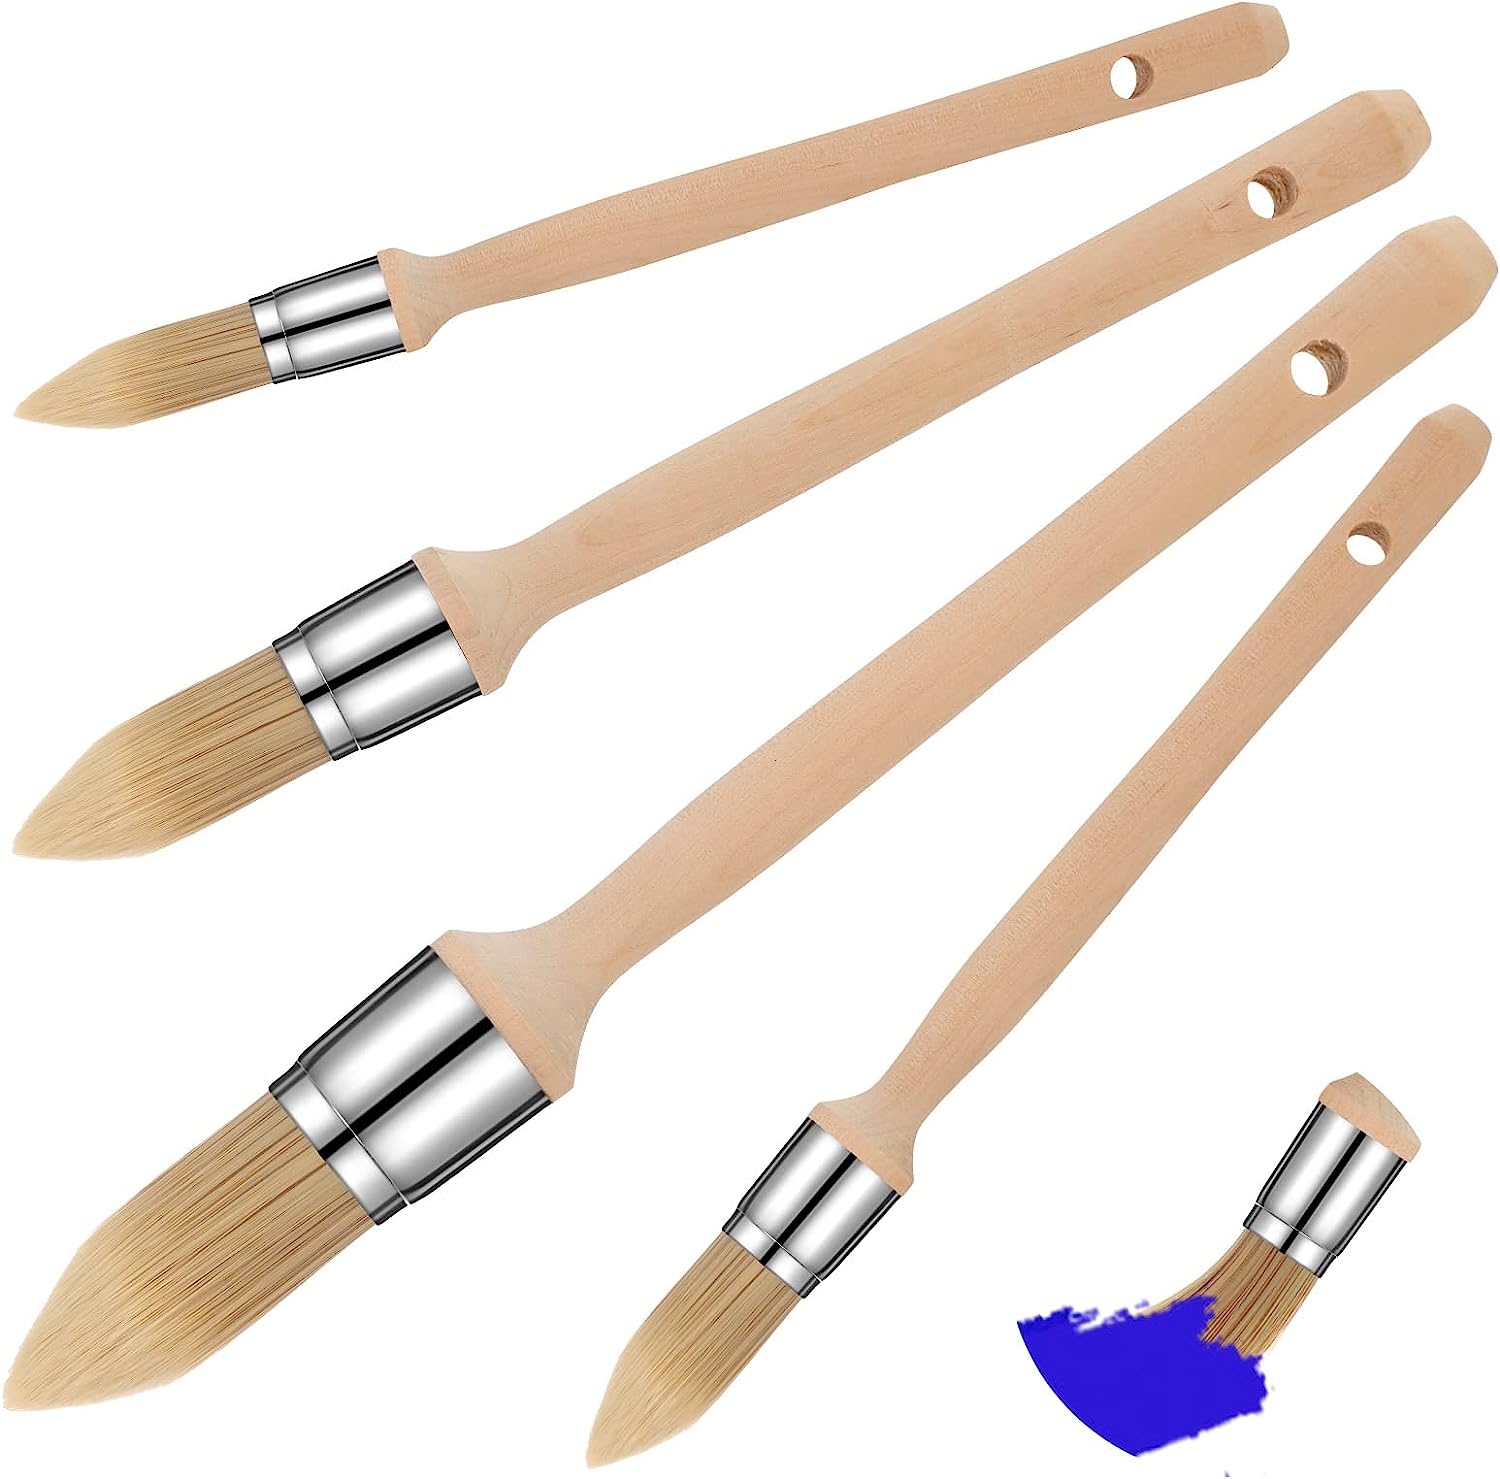 4 Pieces Trim Paint Brush Edge Painting Tool with [...]